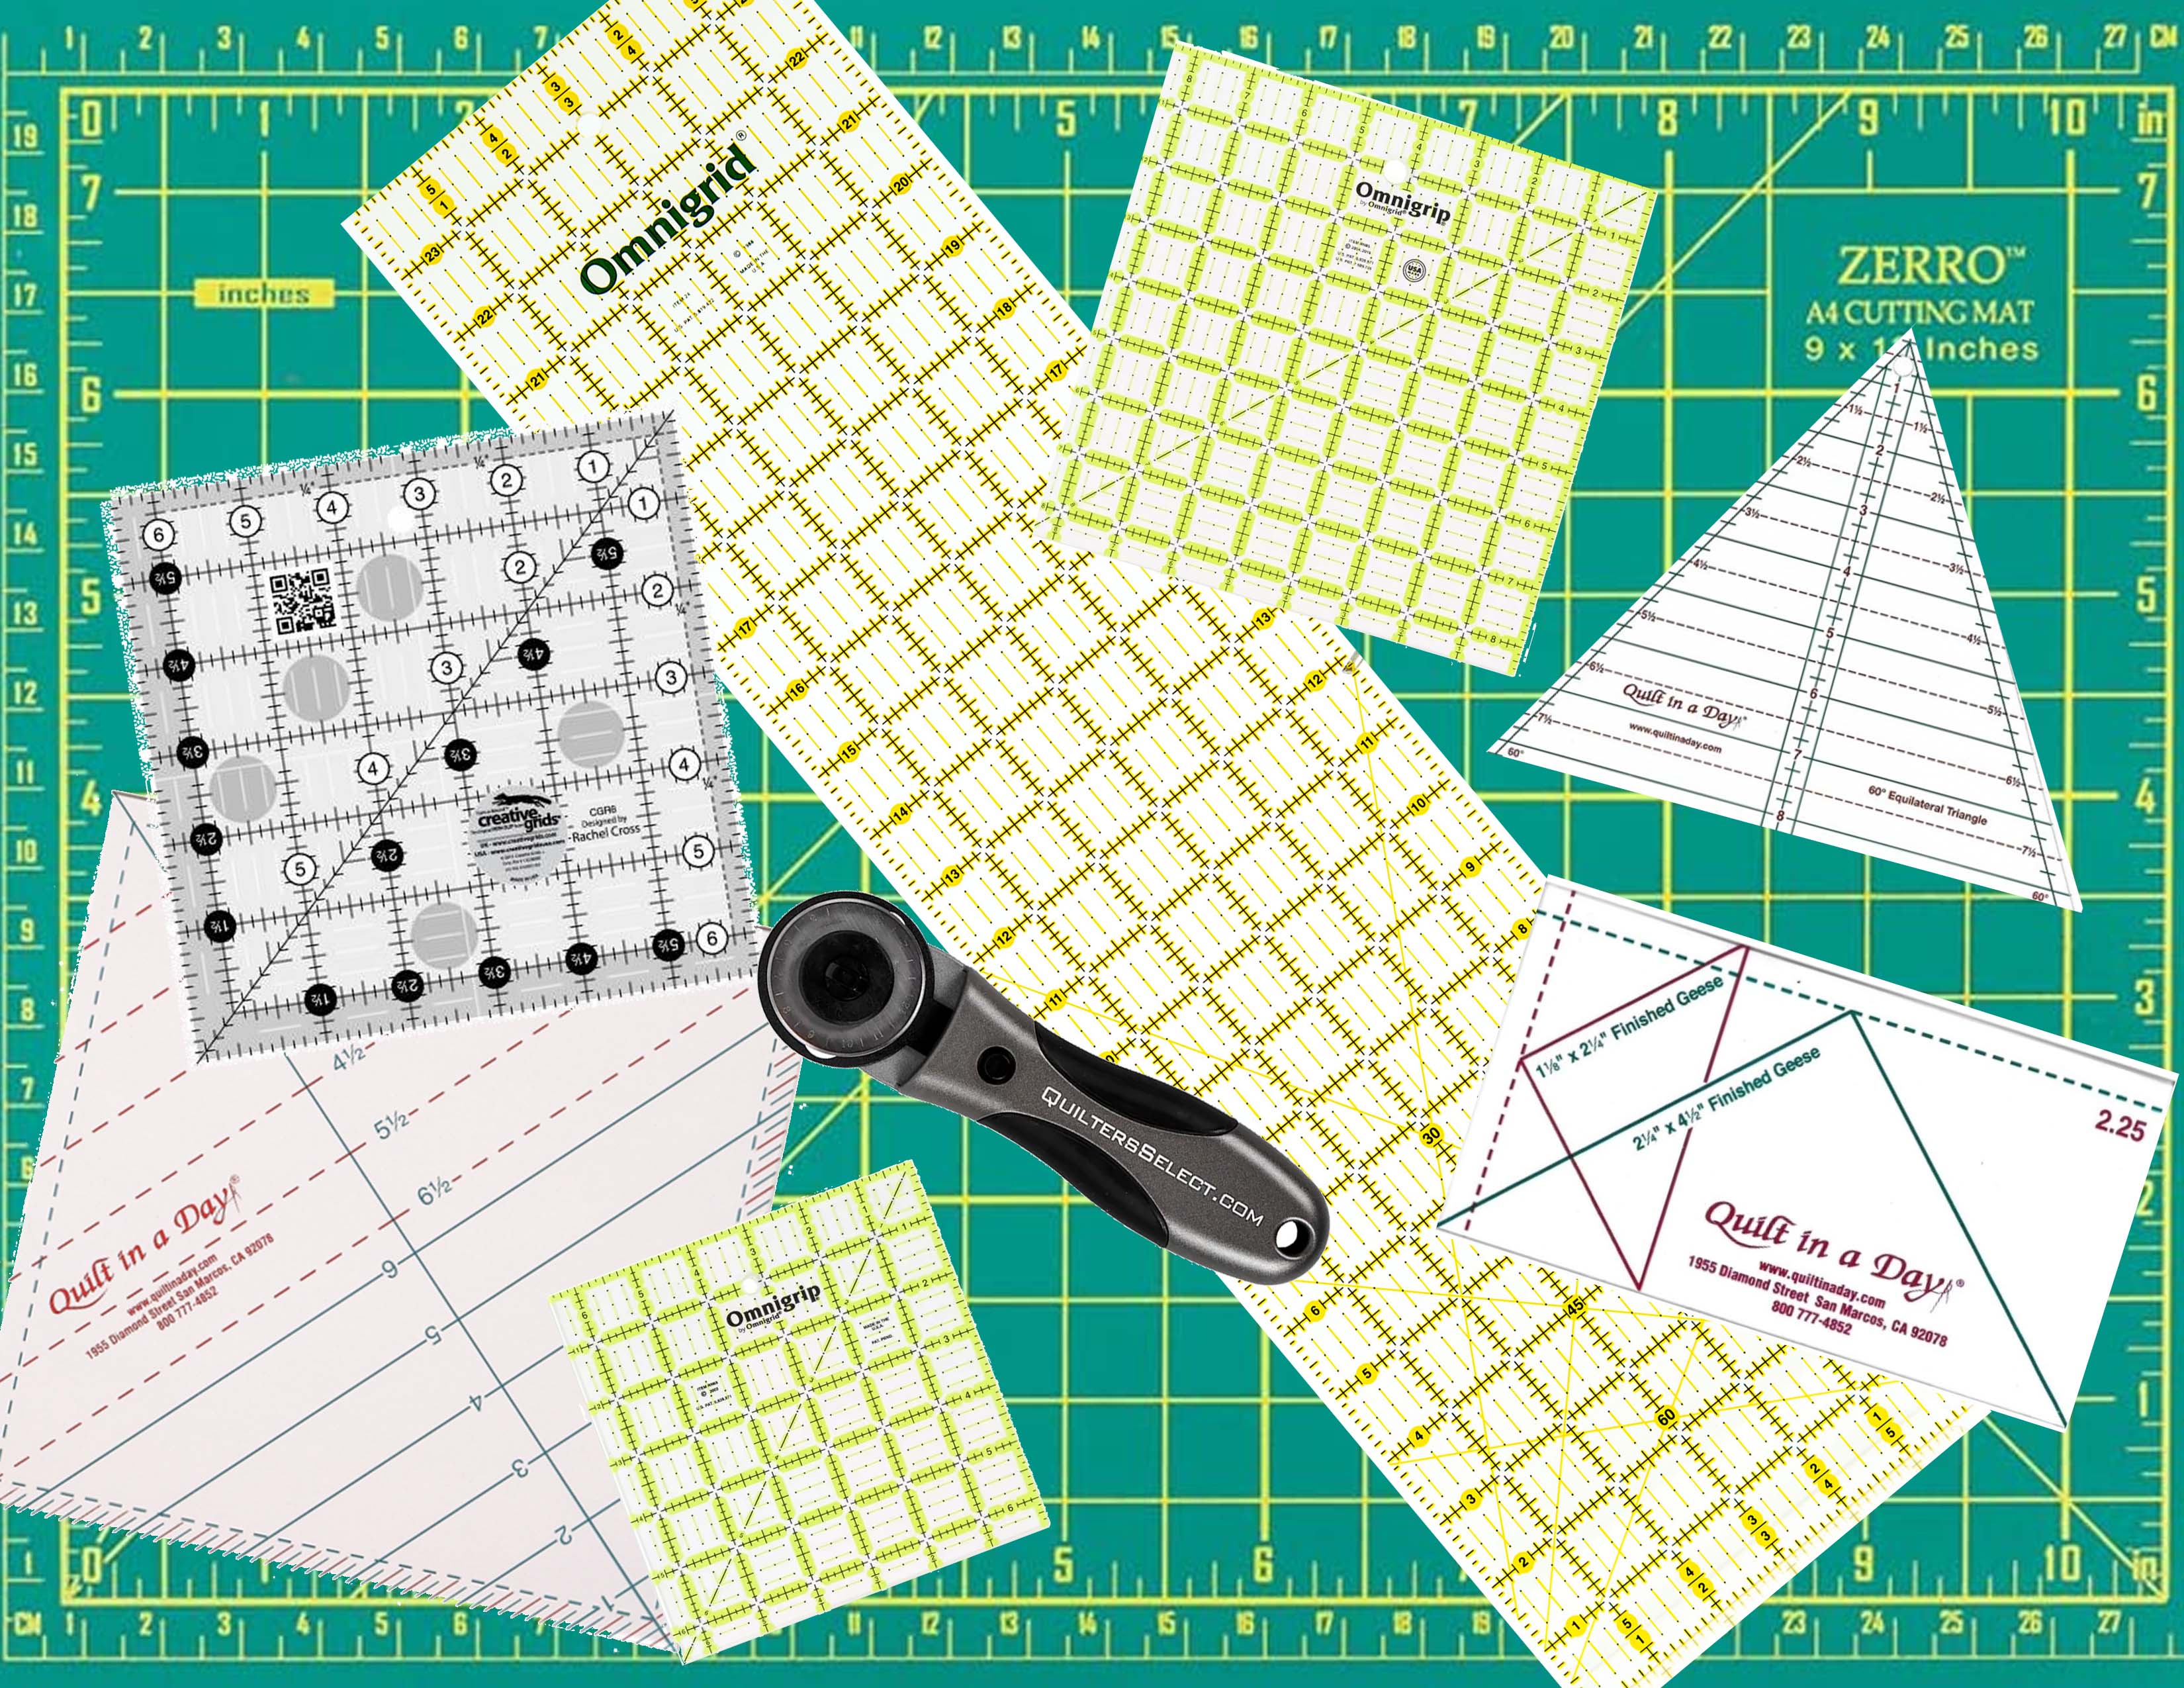 A Guide to the Different Types of Quilting Rulers